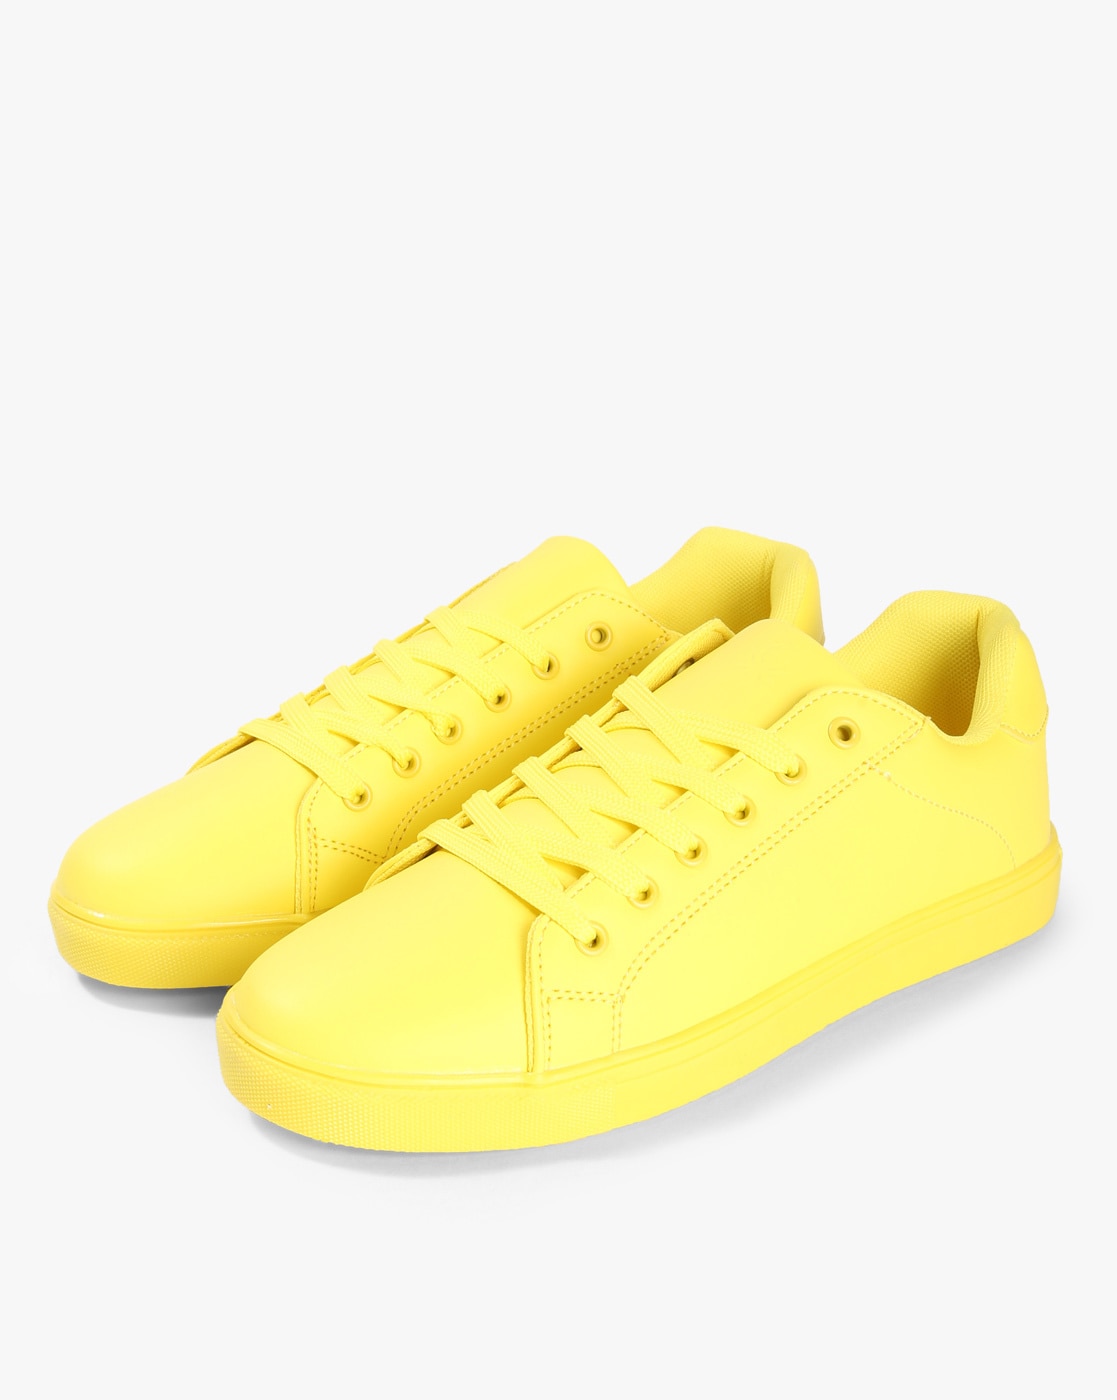 Buy Yellow Casual Shoes for Women by 